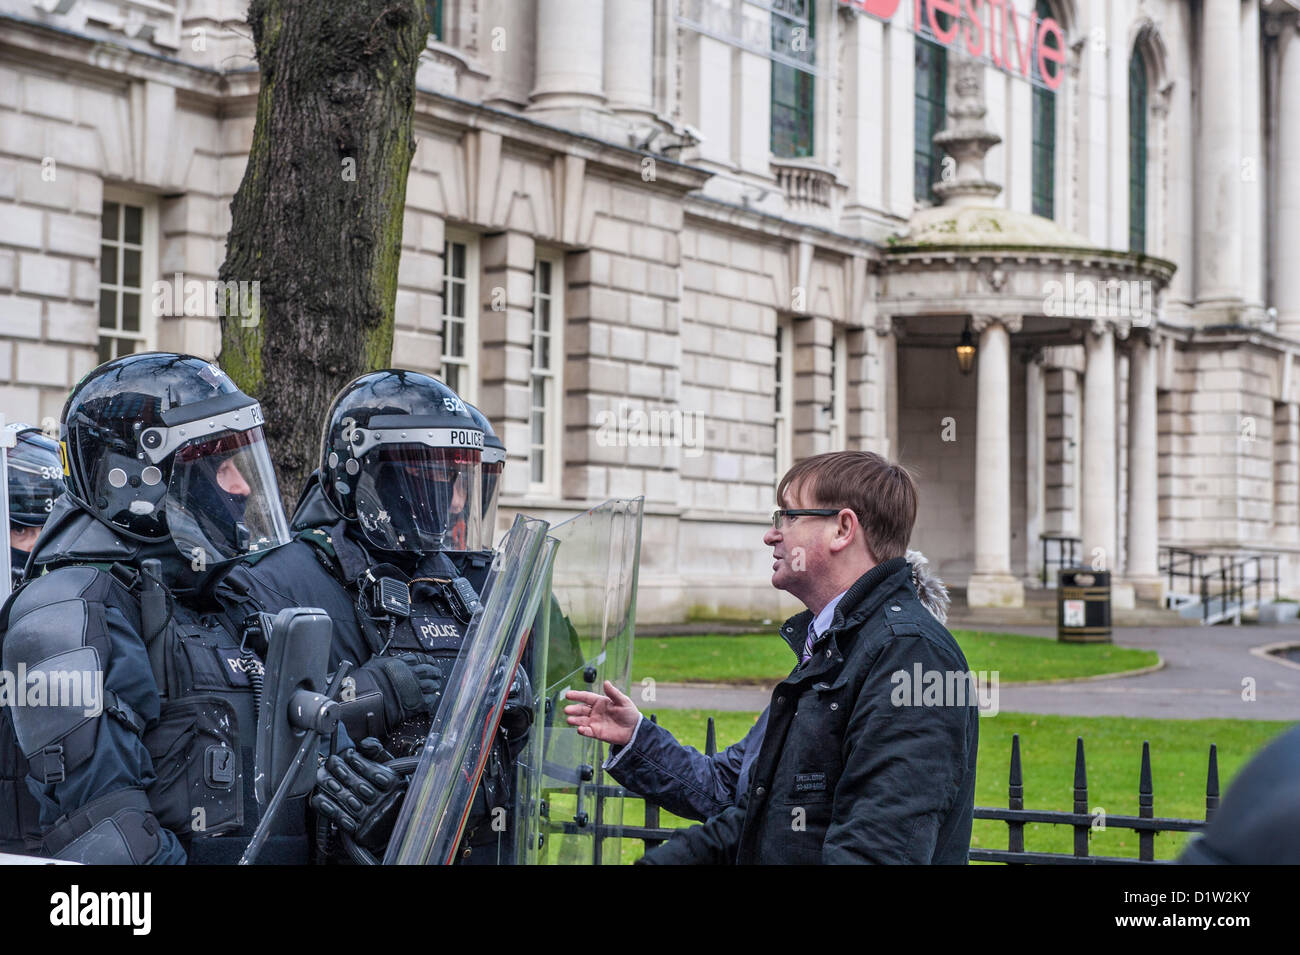 Saturday 5th January 2013, Belfast, Northern Ireland, UK.Willie Frazer of FAIR held by police at Belfast City Hall Flag Protest. Alamy Live News. Stock Photo